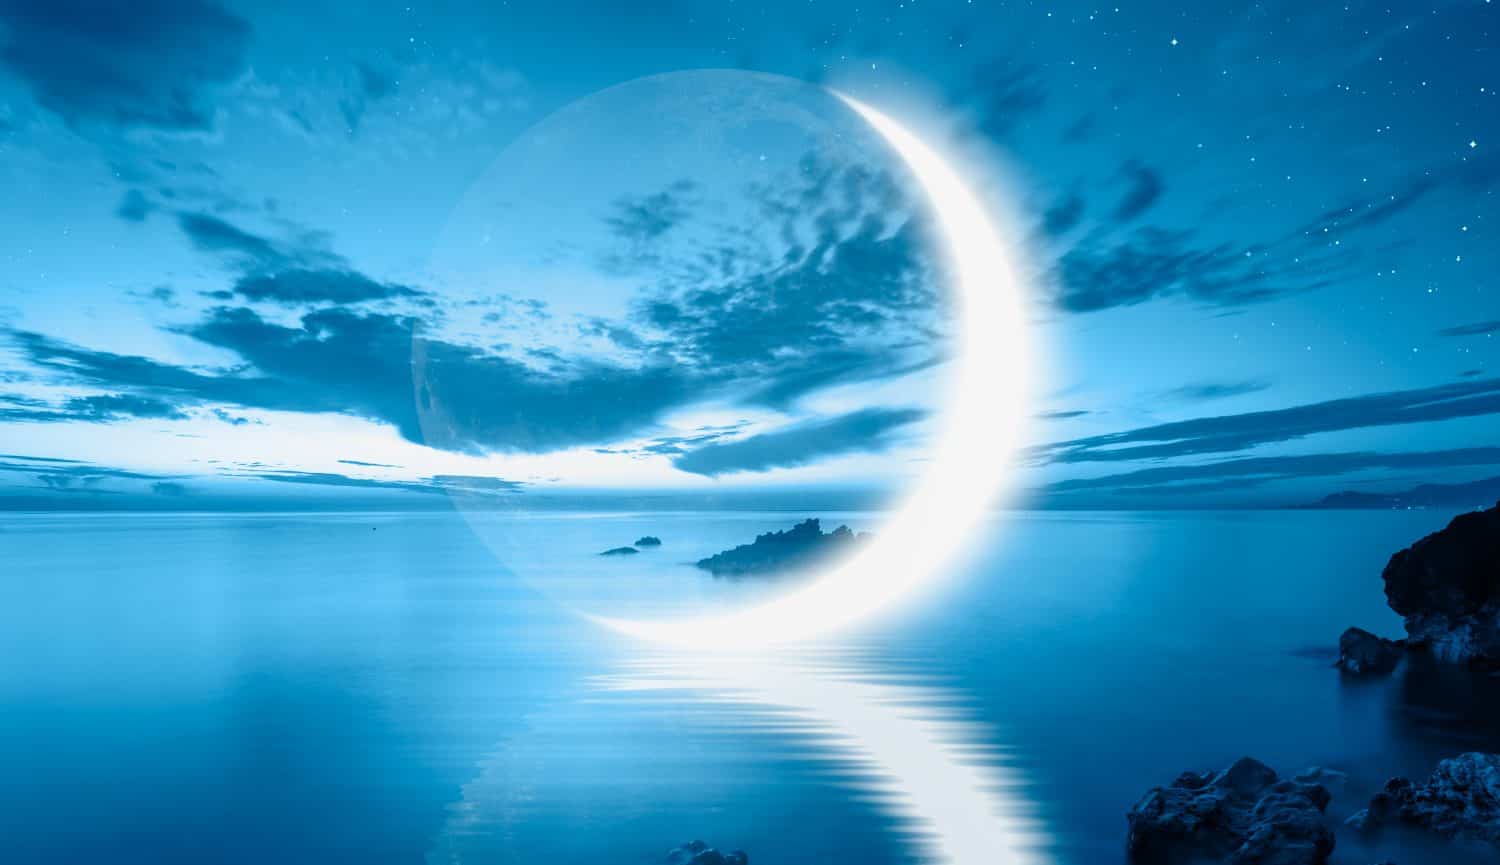 Abstract blue background with crescent moon over the sea,  lot of stars in the background at night 